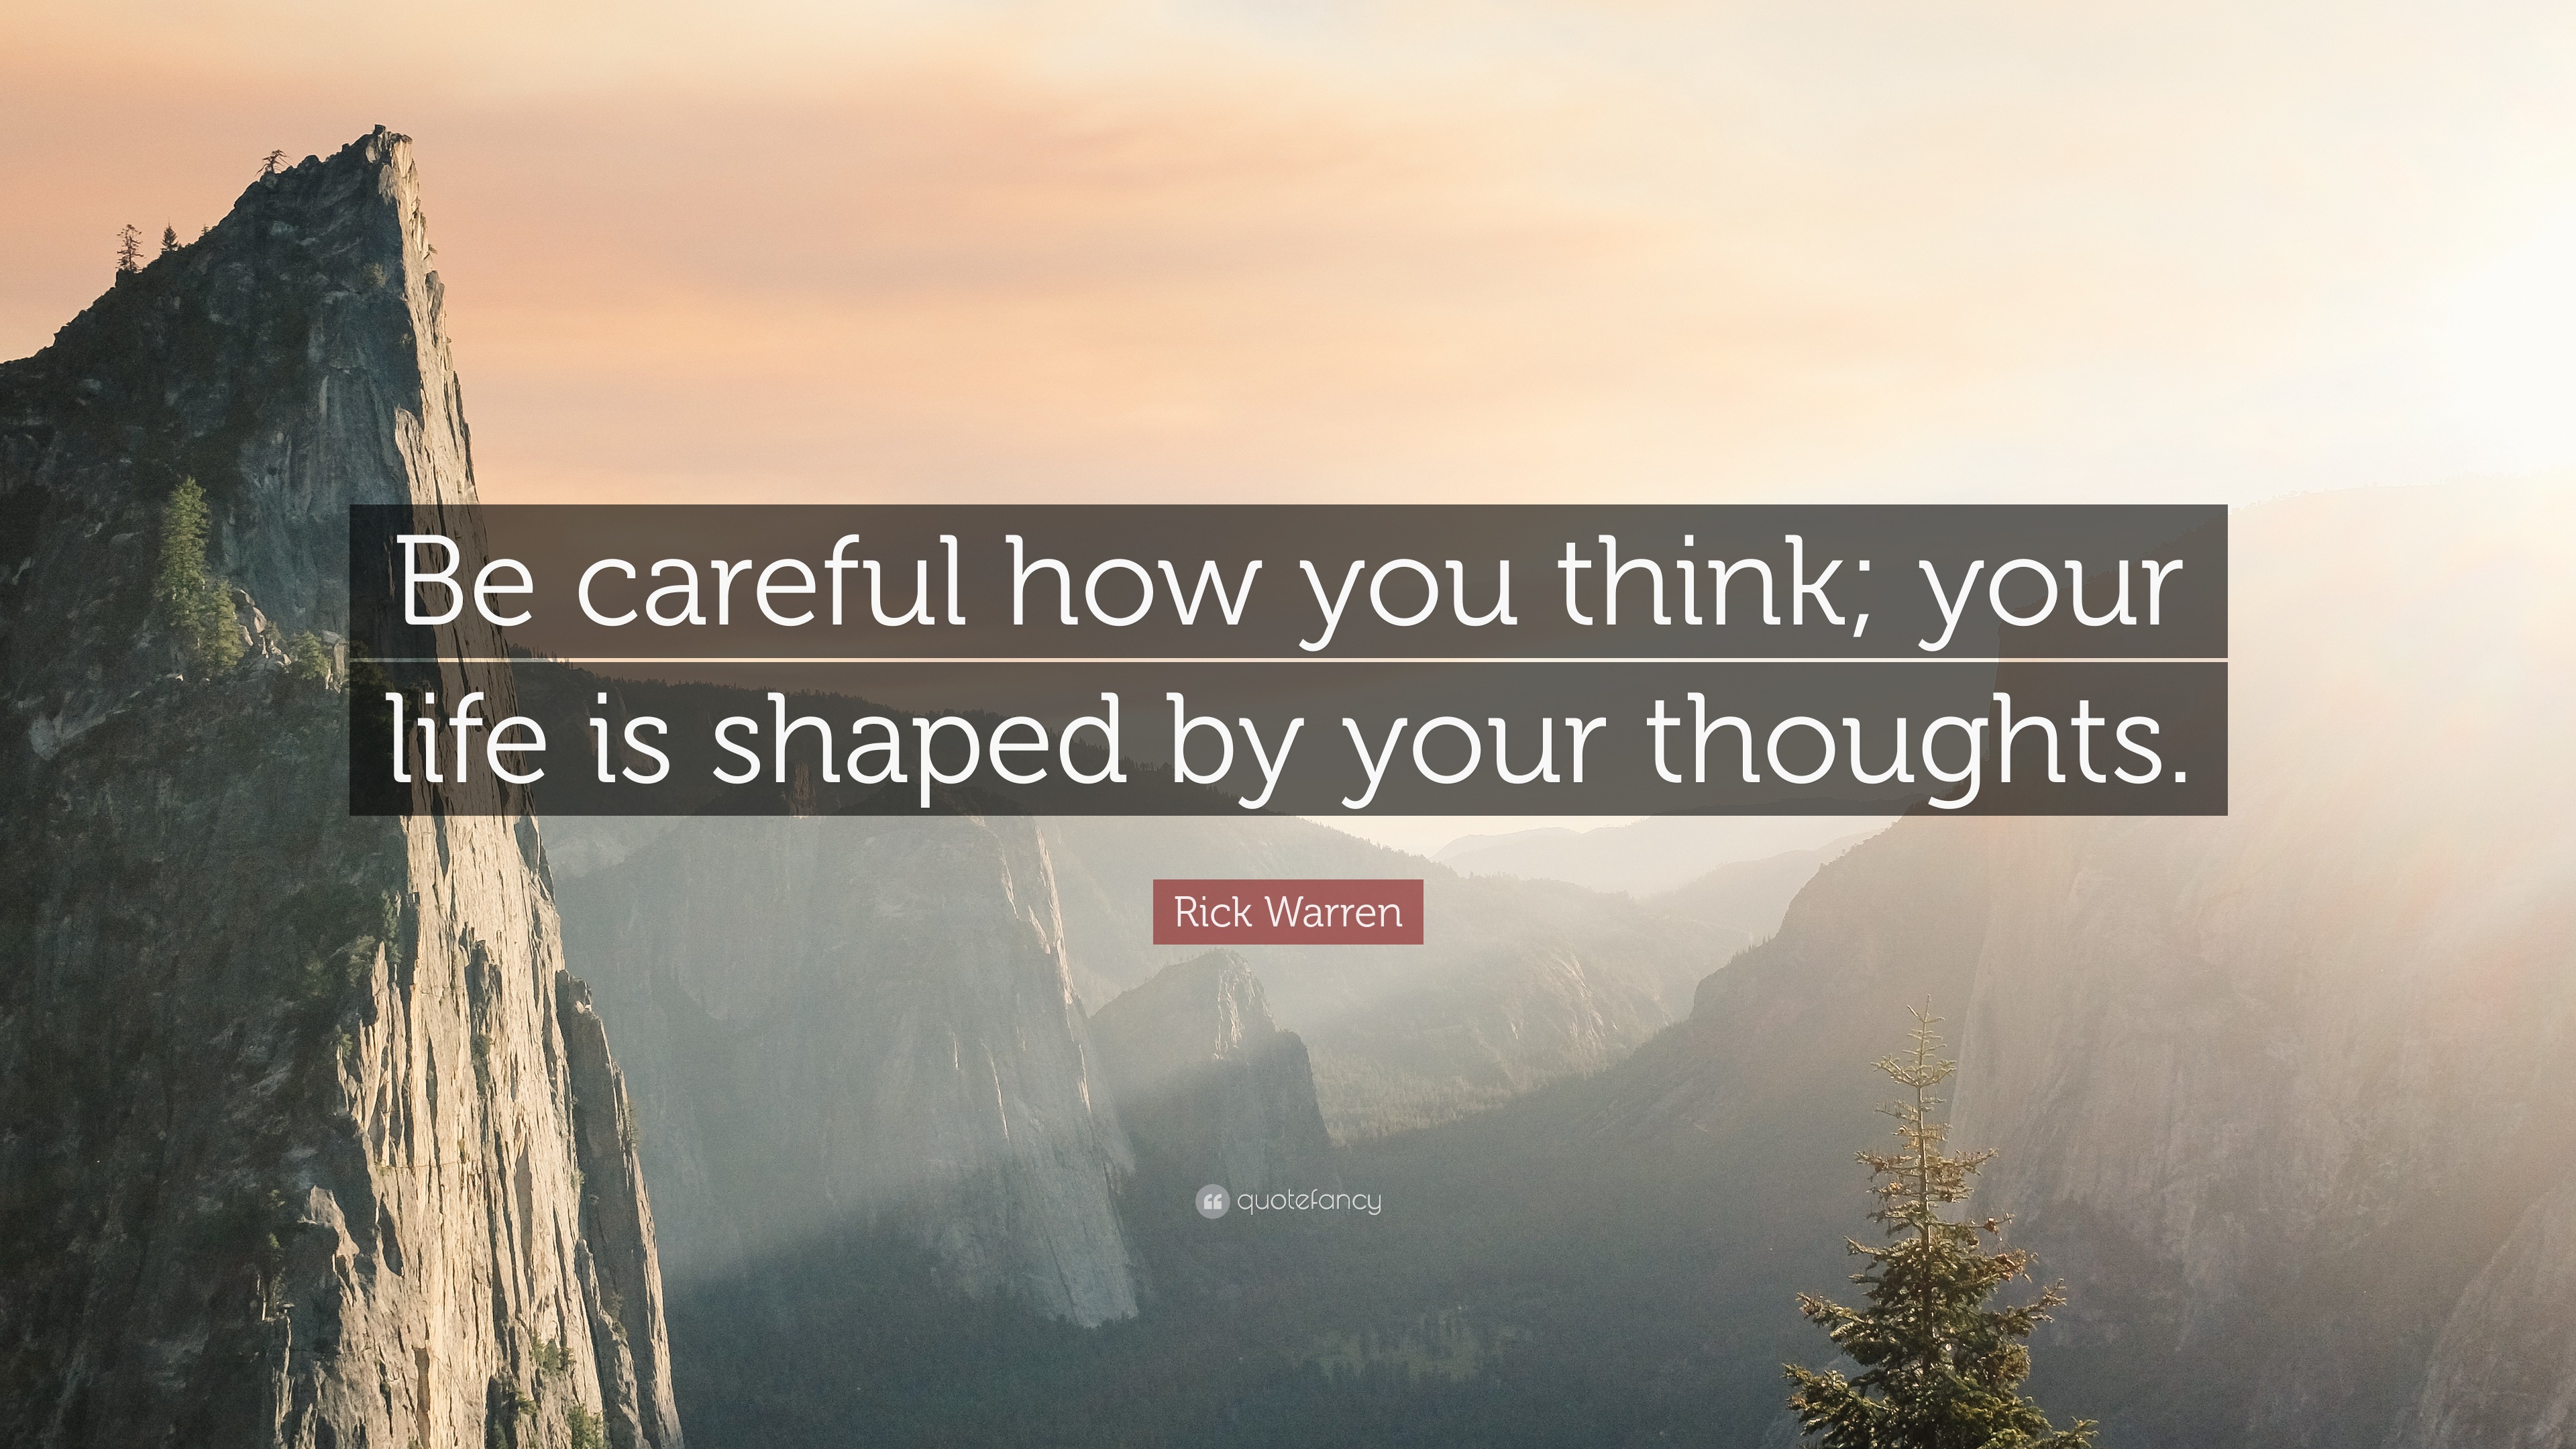 2127699 Rick Warren Quote Be careful how you think your life is shaped by